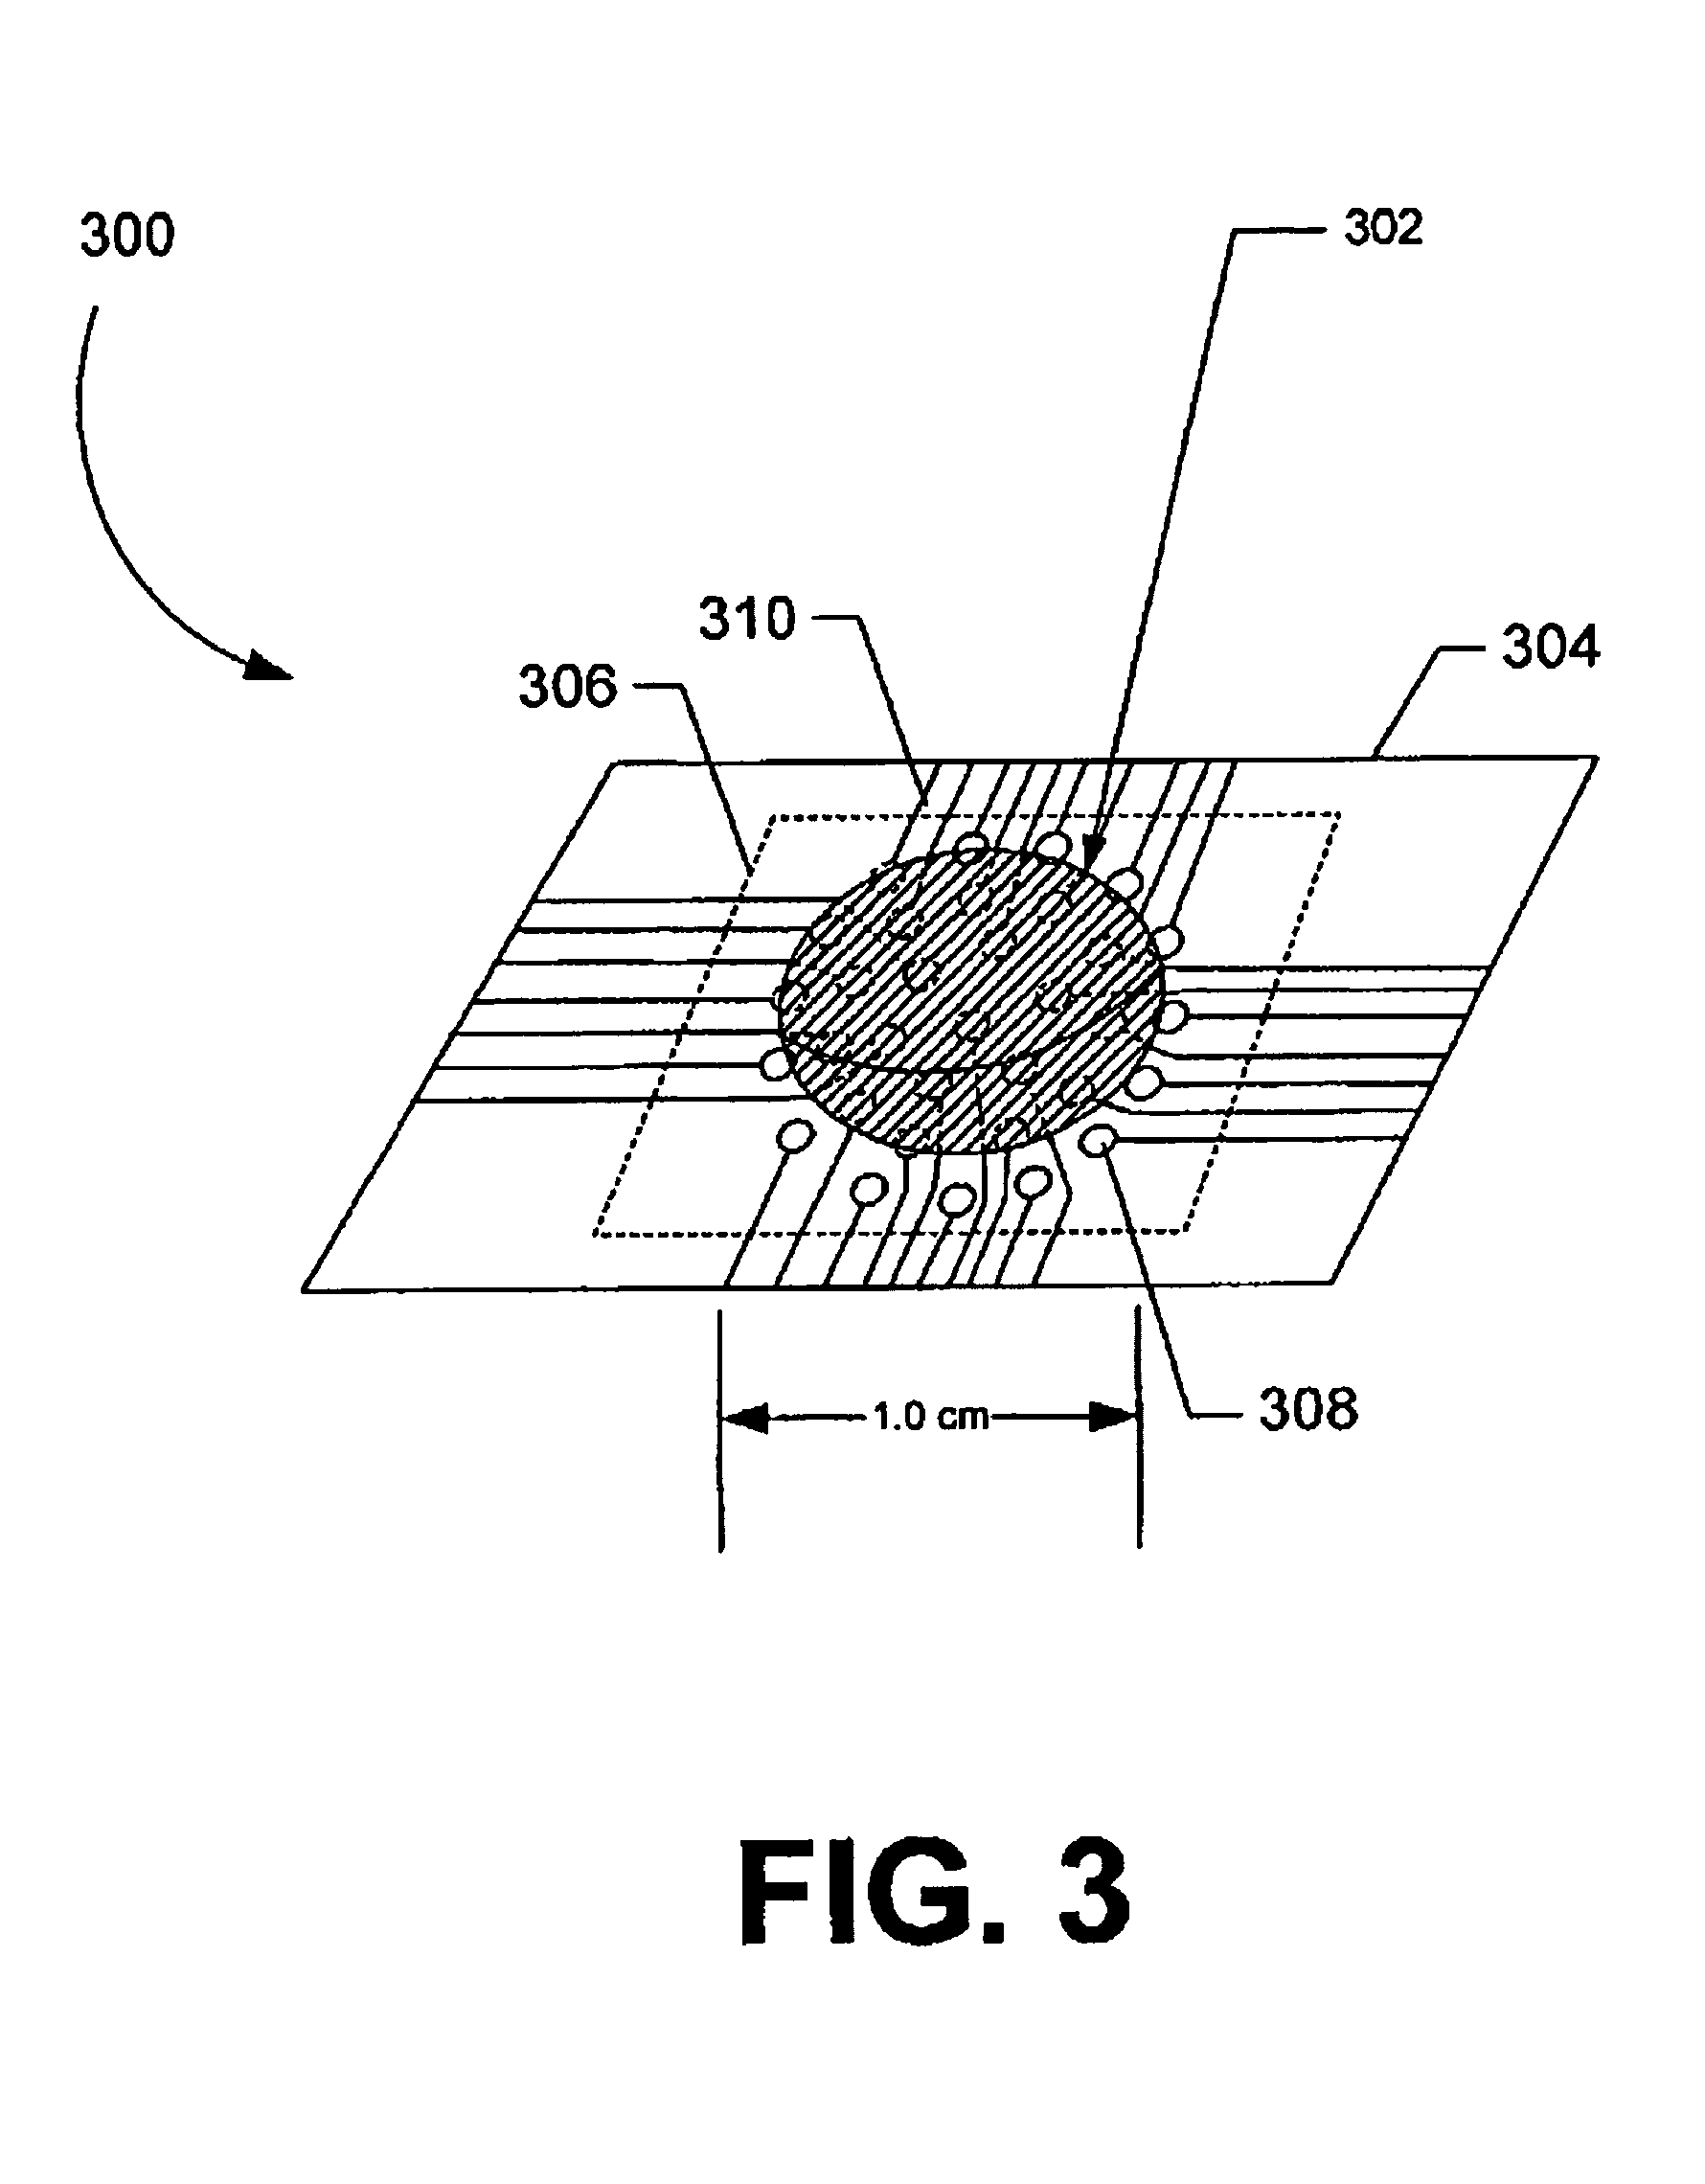 Systems and methods for collecting tear film and measuring tear film osmolarity